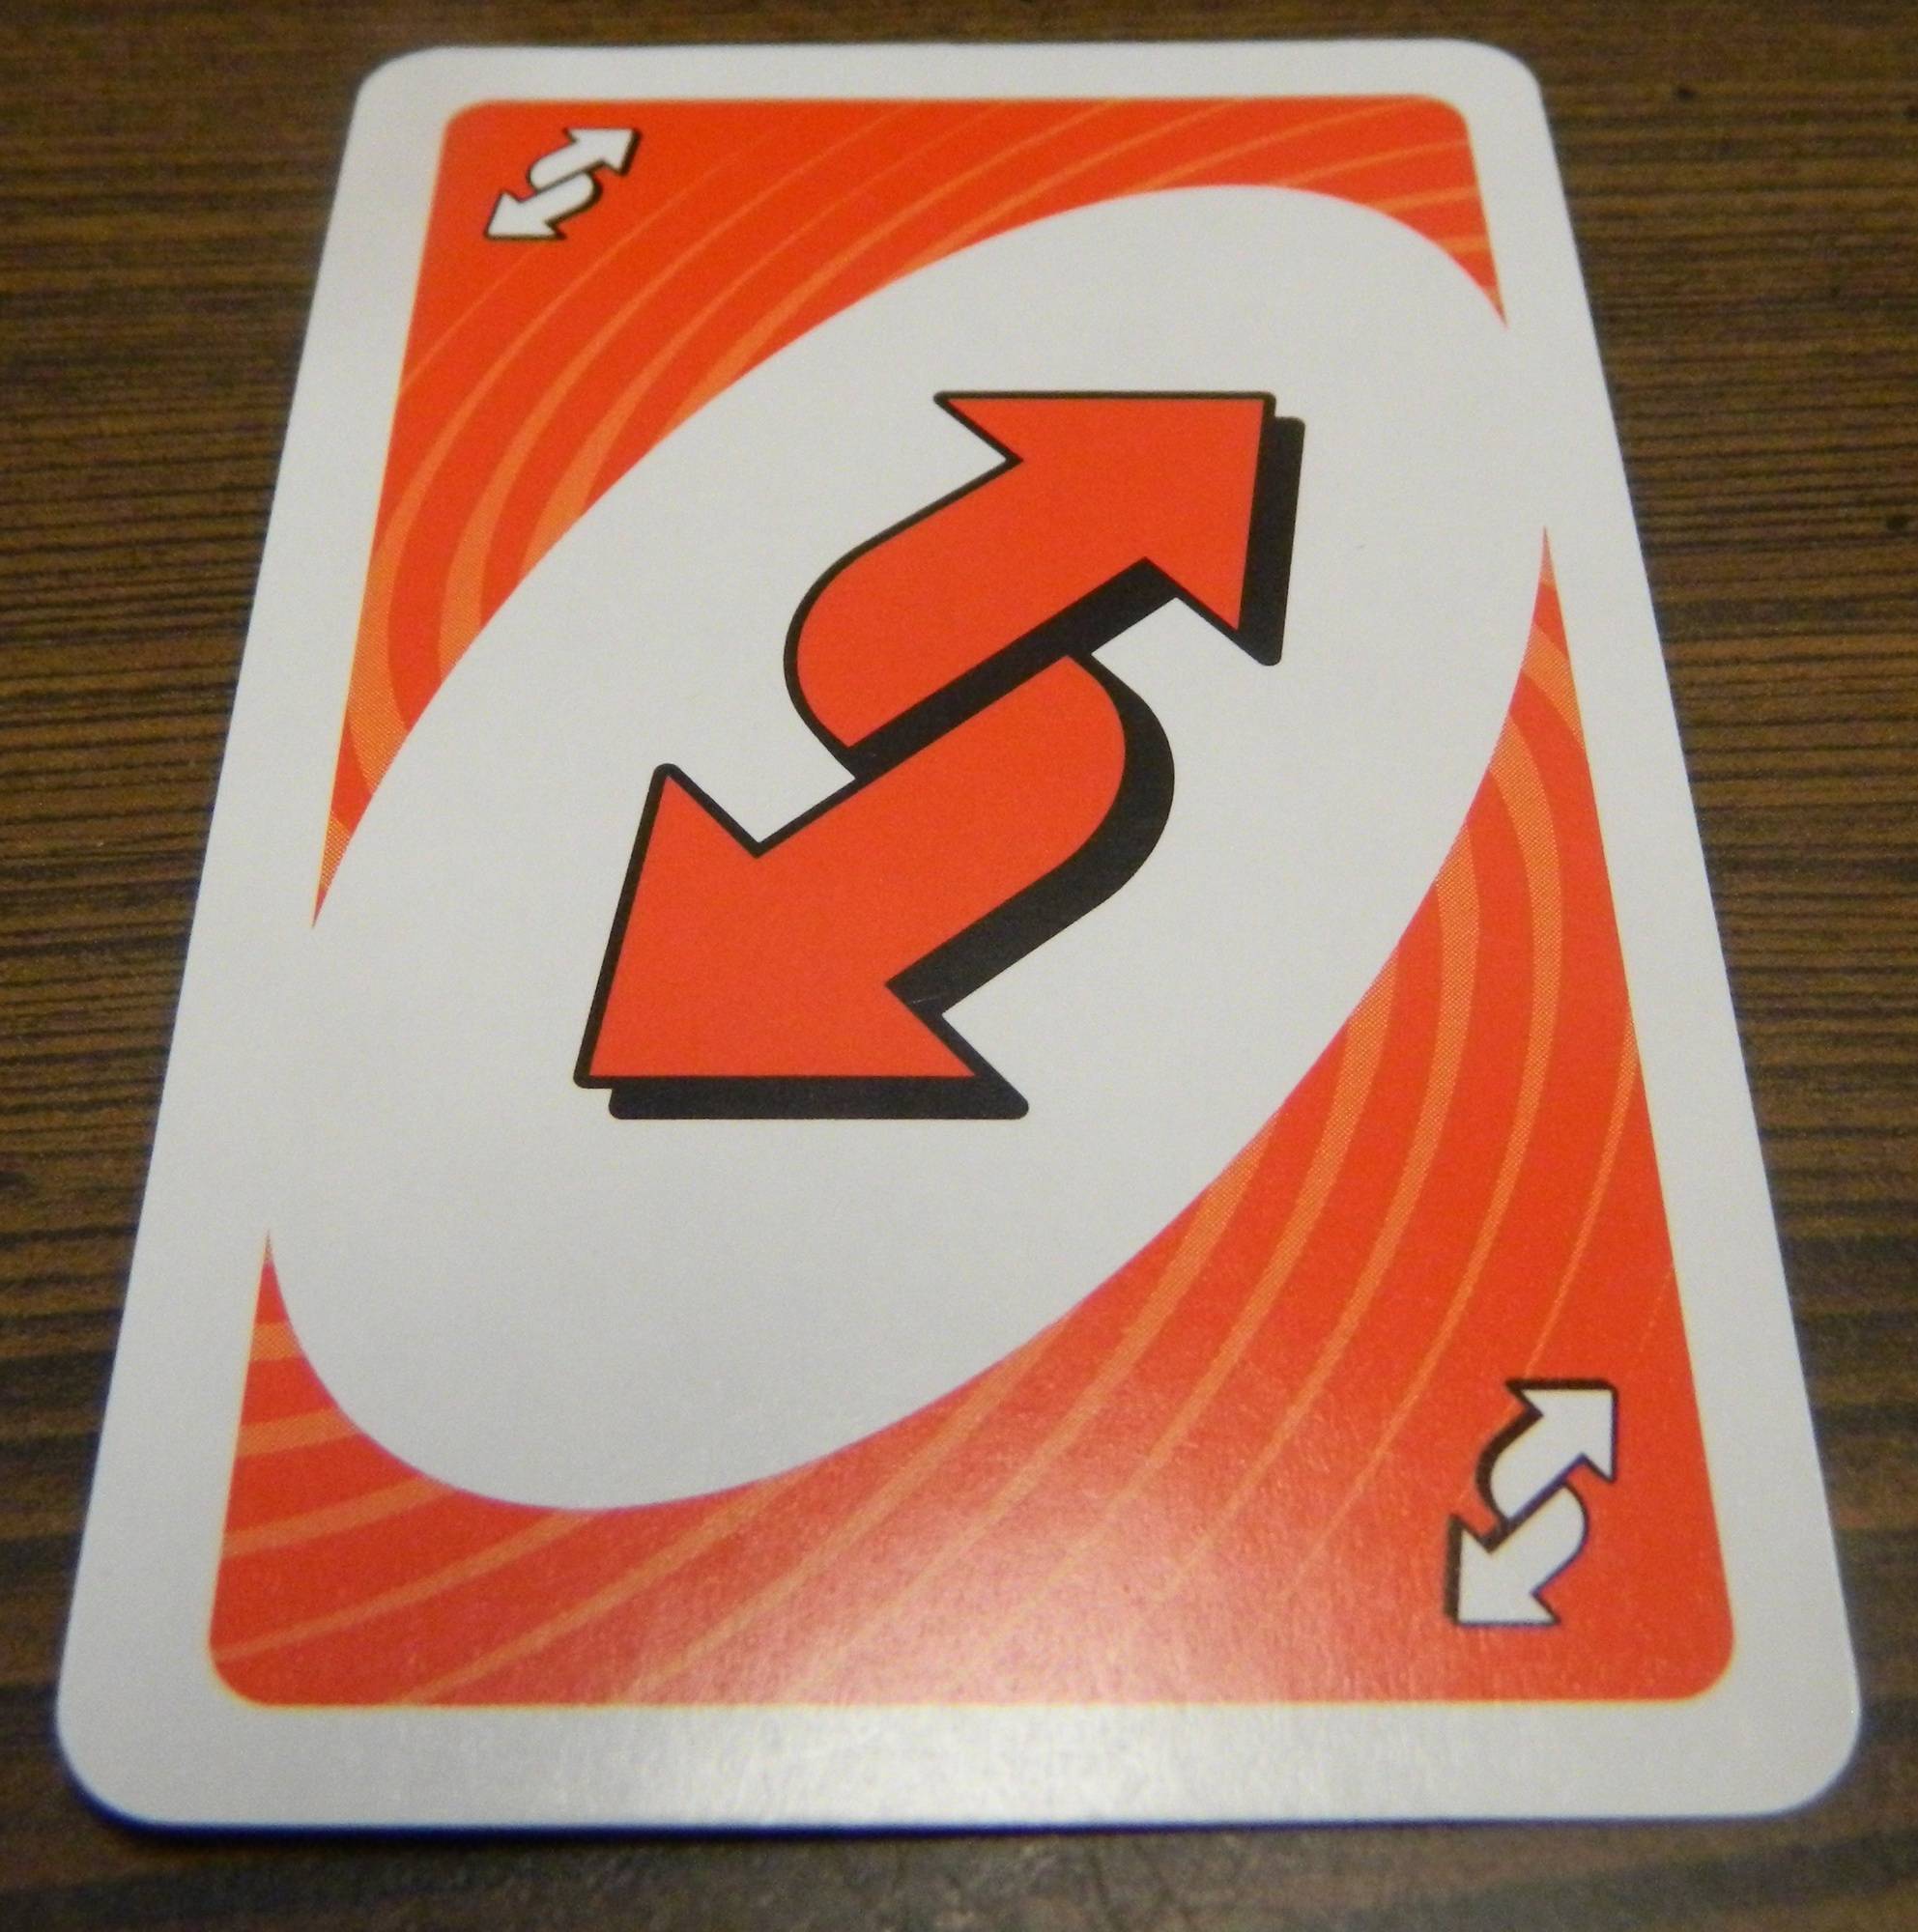 Uno Spin Card Game Review And Rules Geeky Hobbies